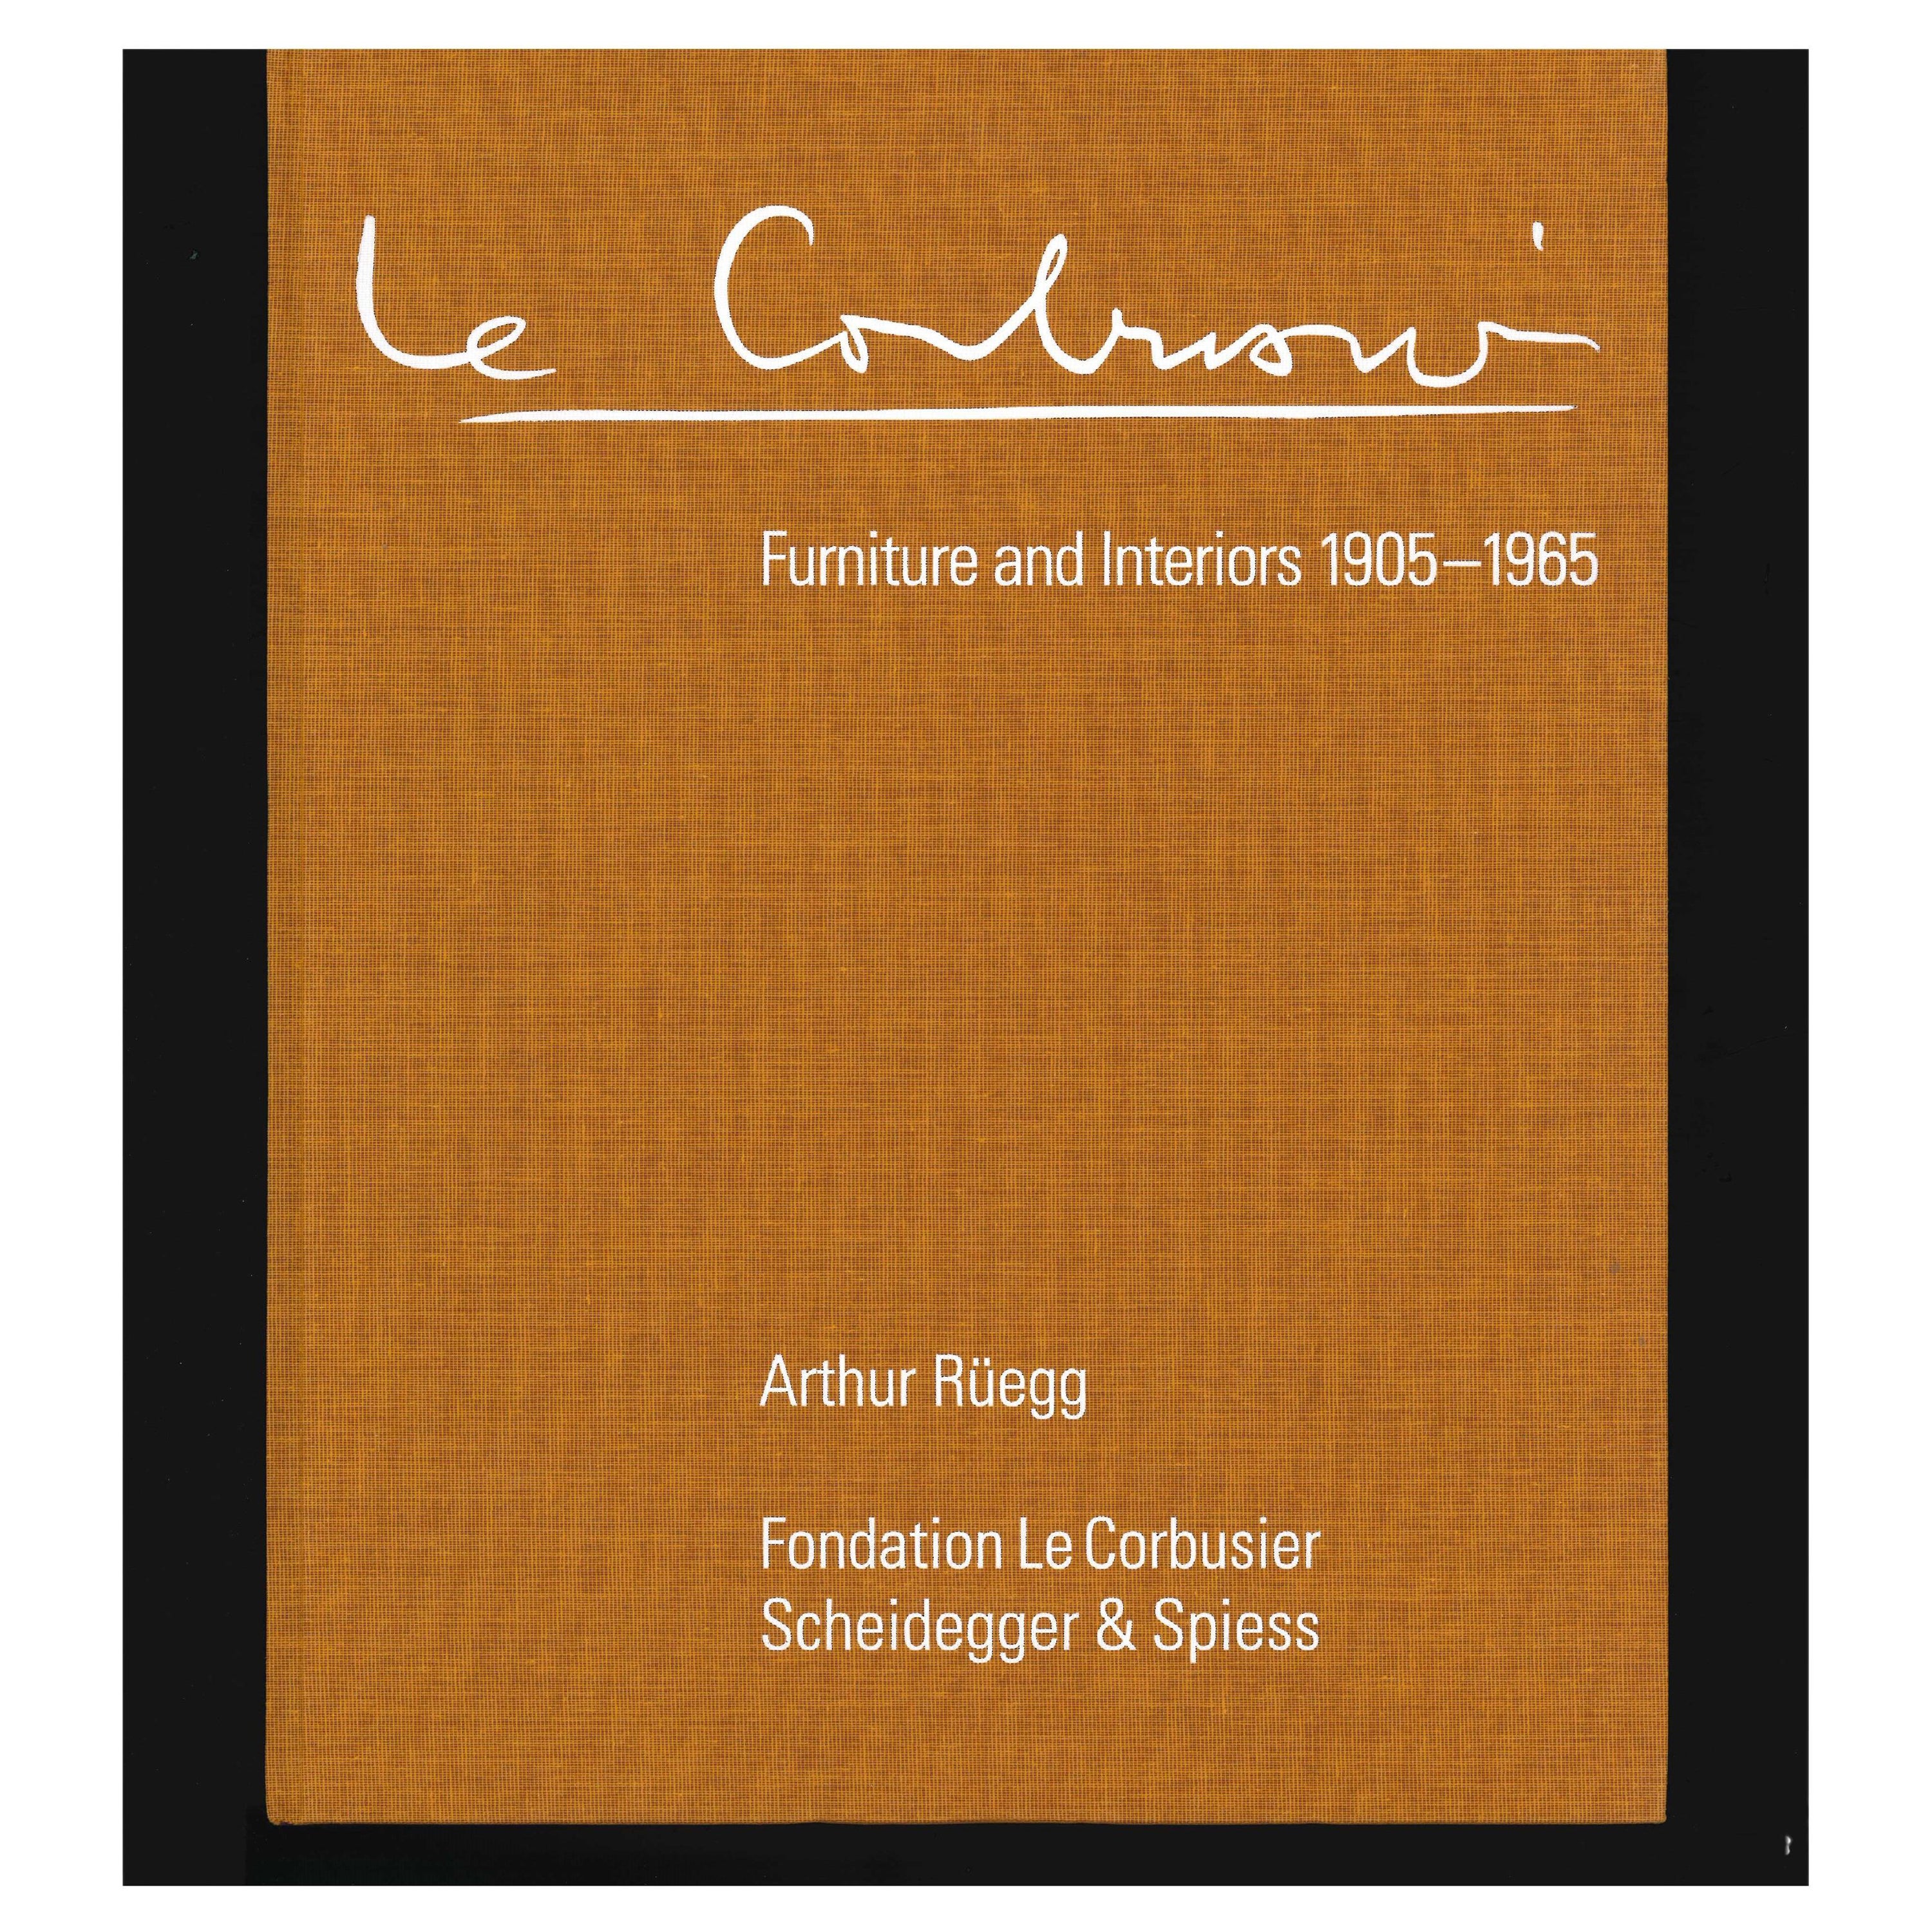 Le Corbusier: Furniture and Interiors 1905-1965 by Arthur Ruegg (Book) For Sale